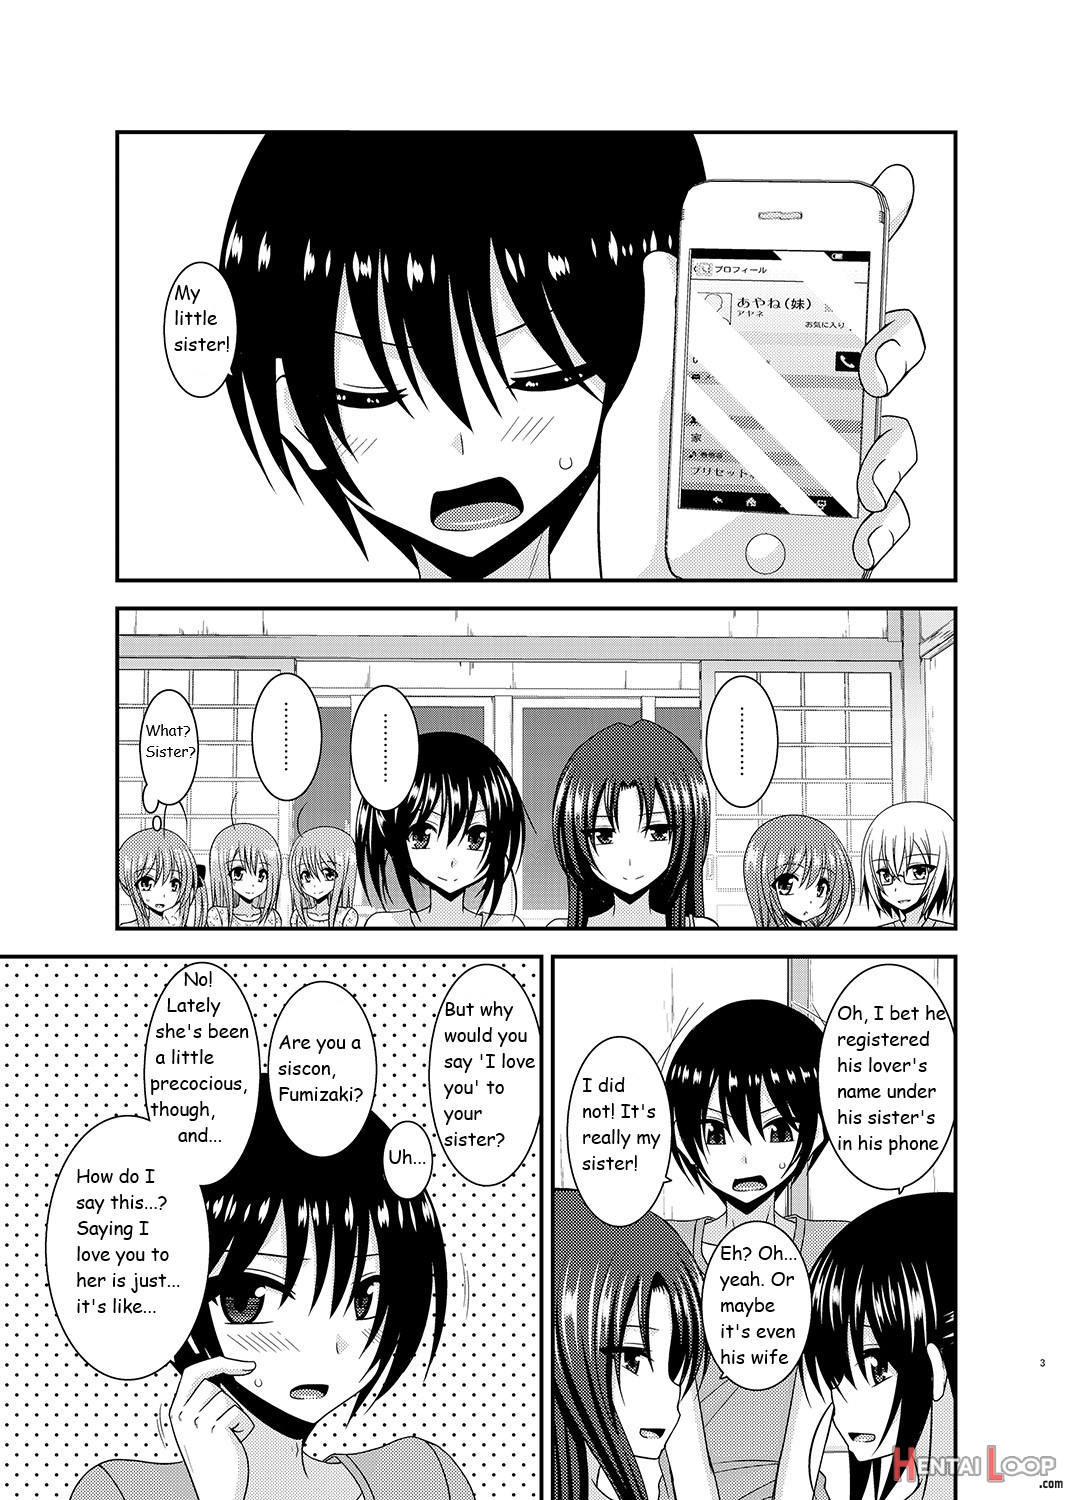 Exhibitionist Girl Diary Chapter 17 page 3